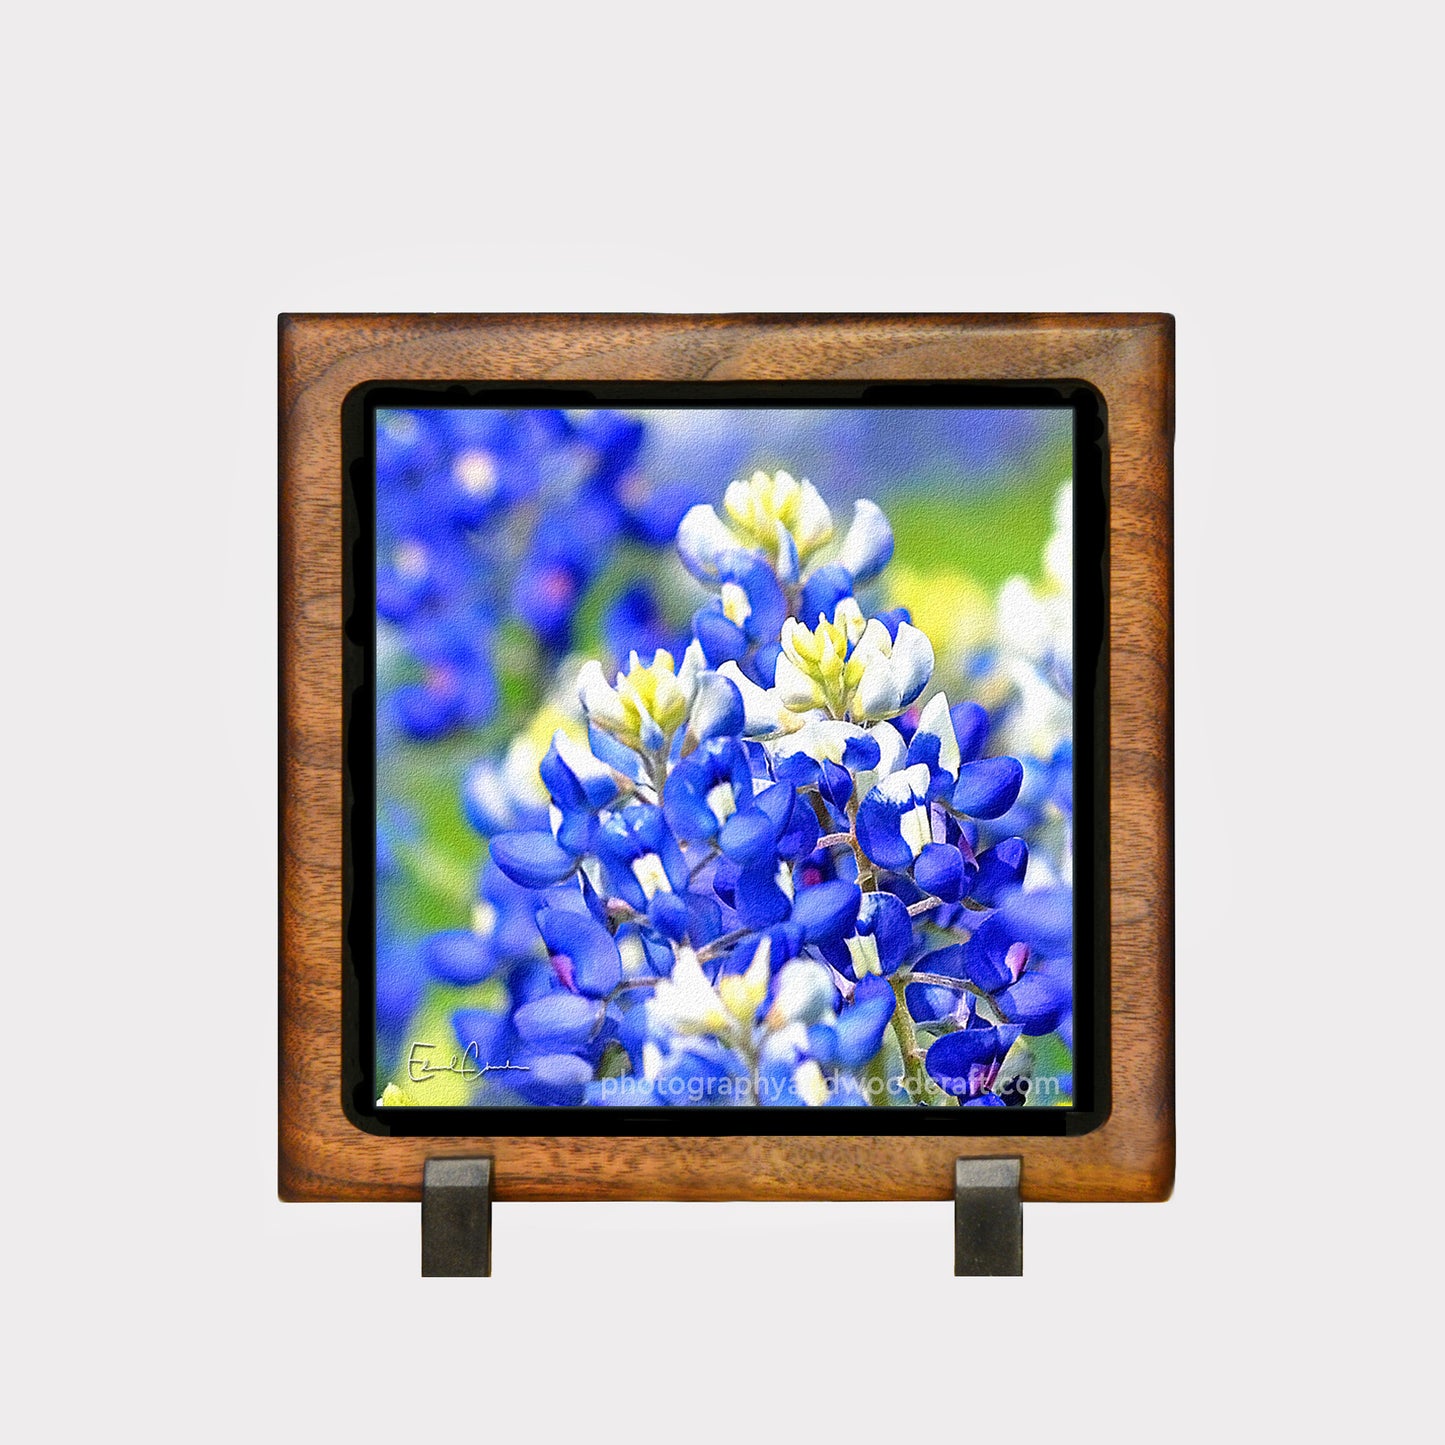 5" x 5" Texas Bluebonnets. Canvas Print in Solid Wood Floating Frame